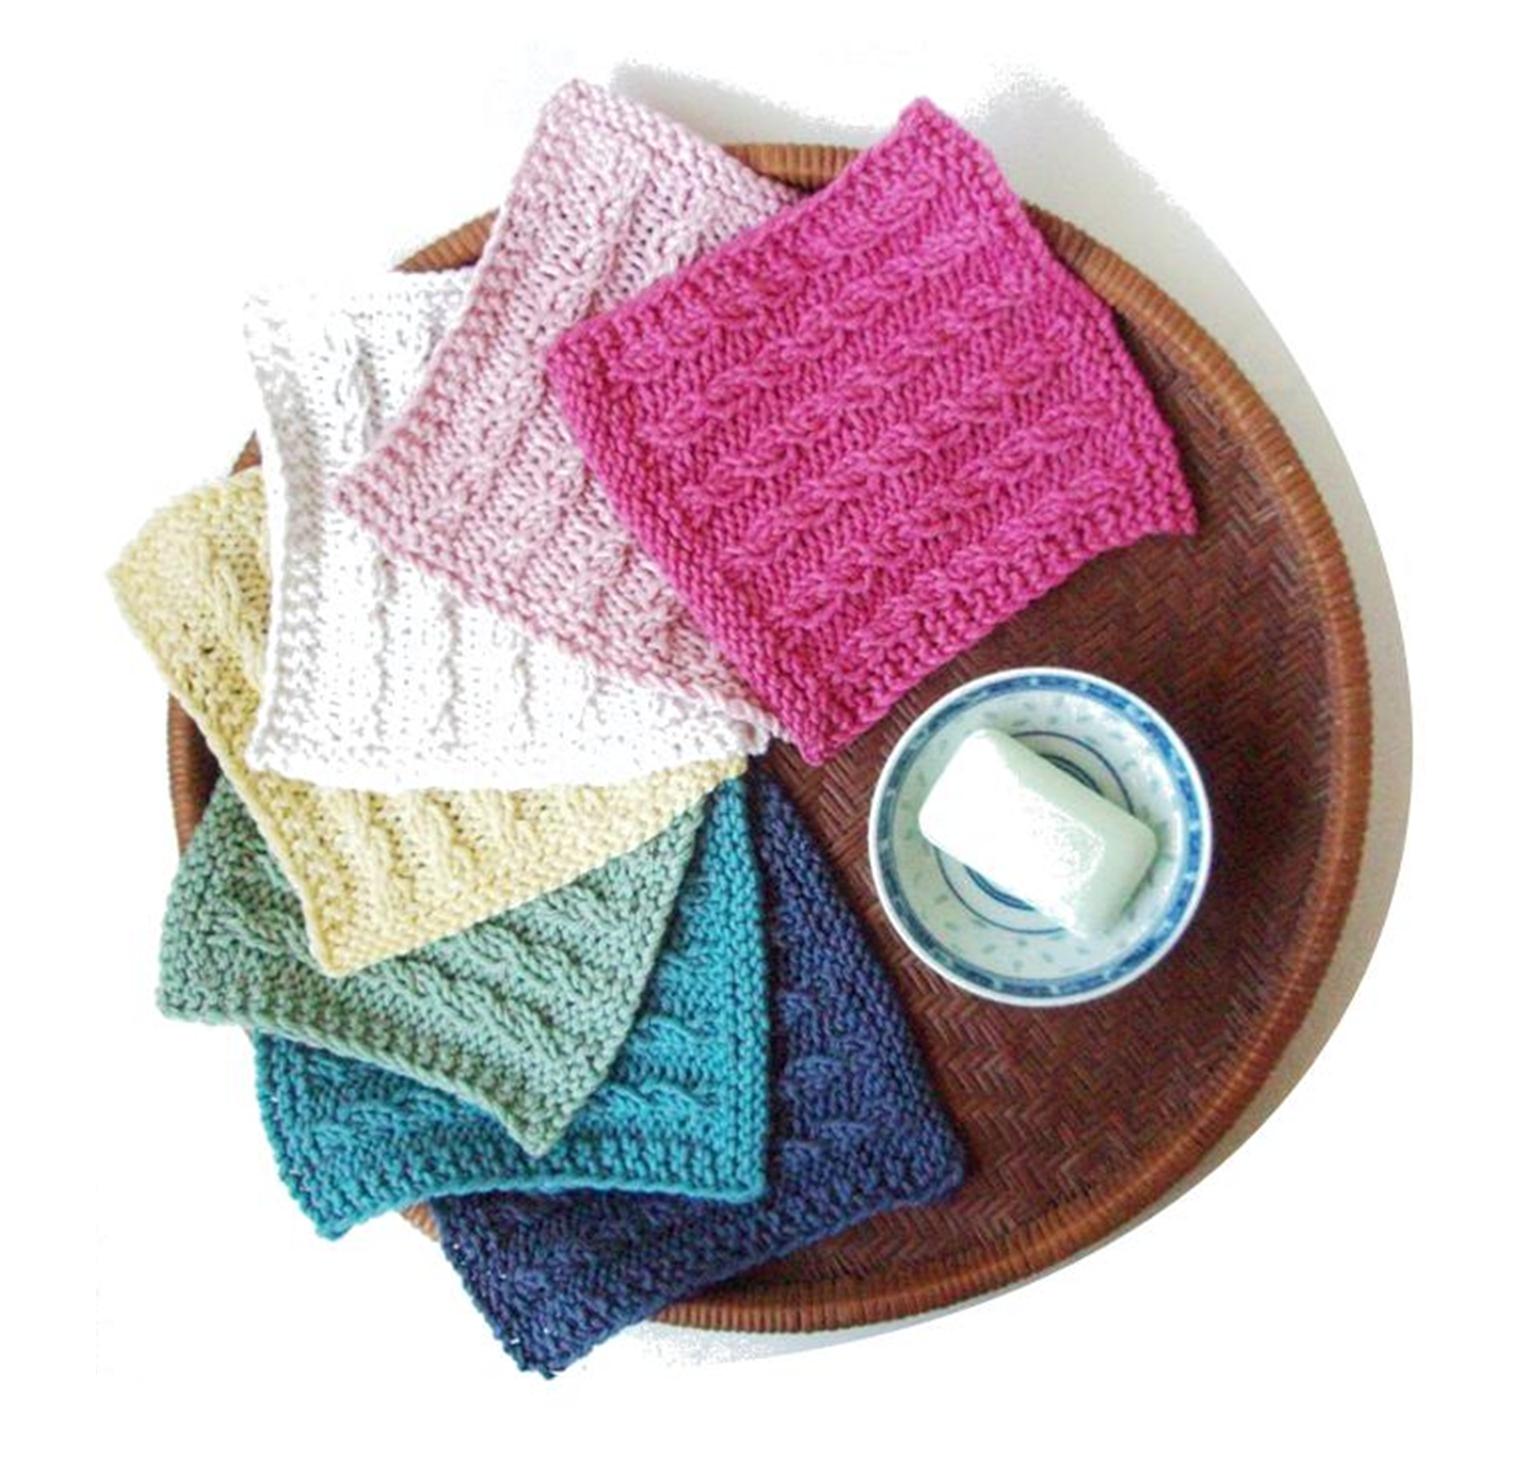 an array of colorful, handknit cabled washcloths on a wooden plate with a bar of soap